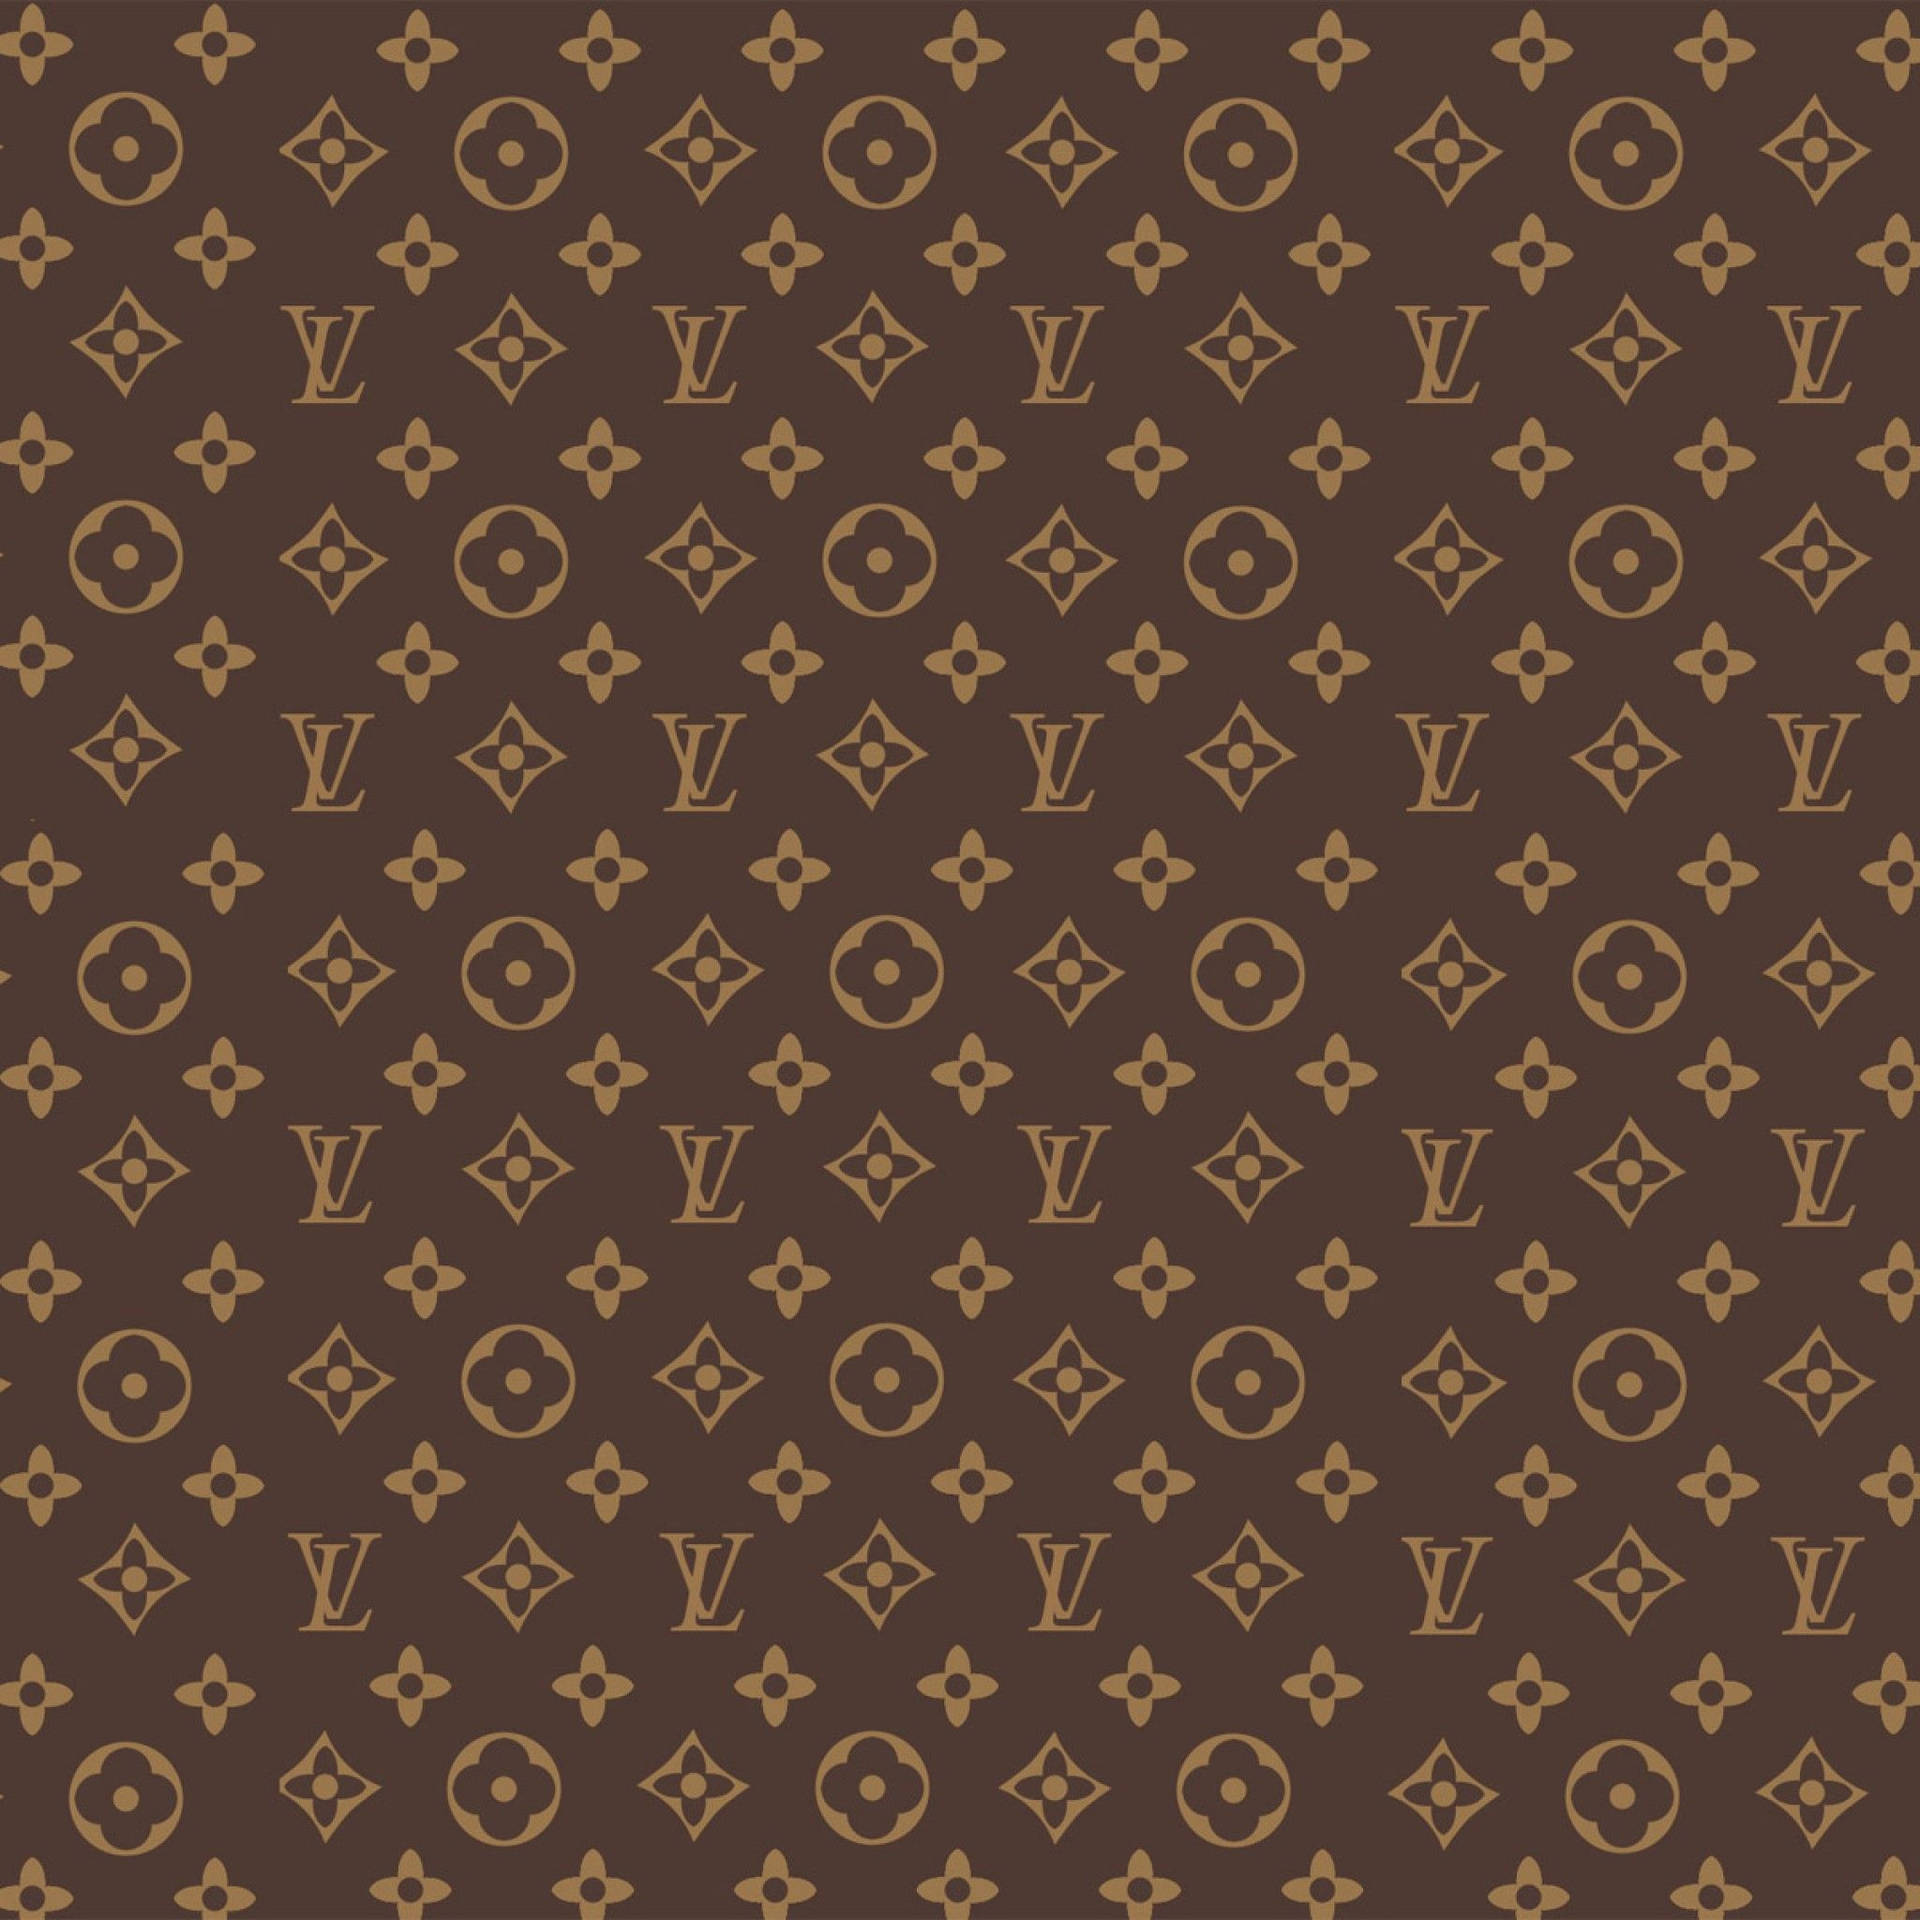 Timeless luxury with this vintage Louis Vuitton print. Wallpaper